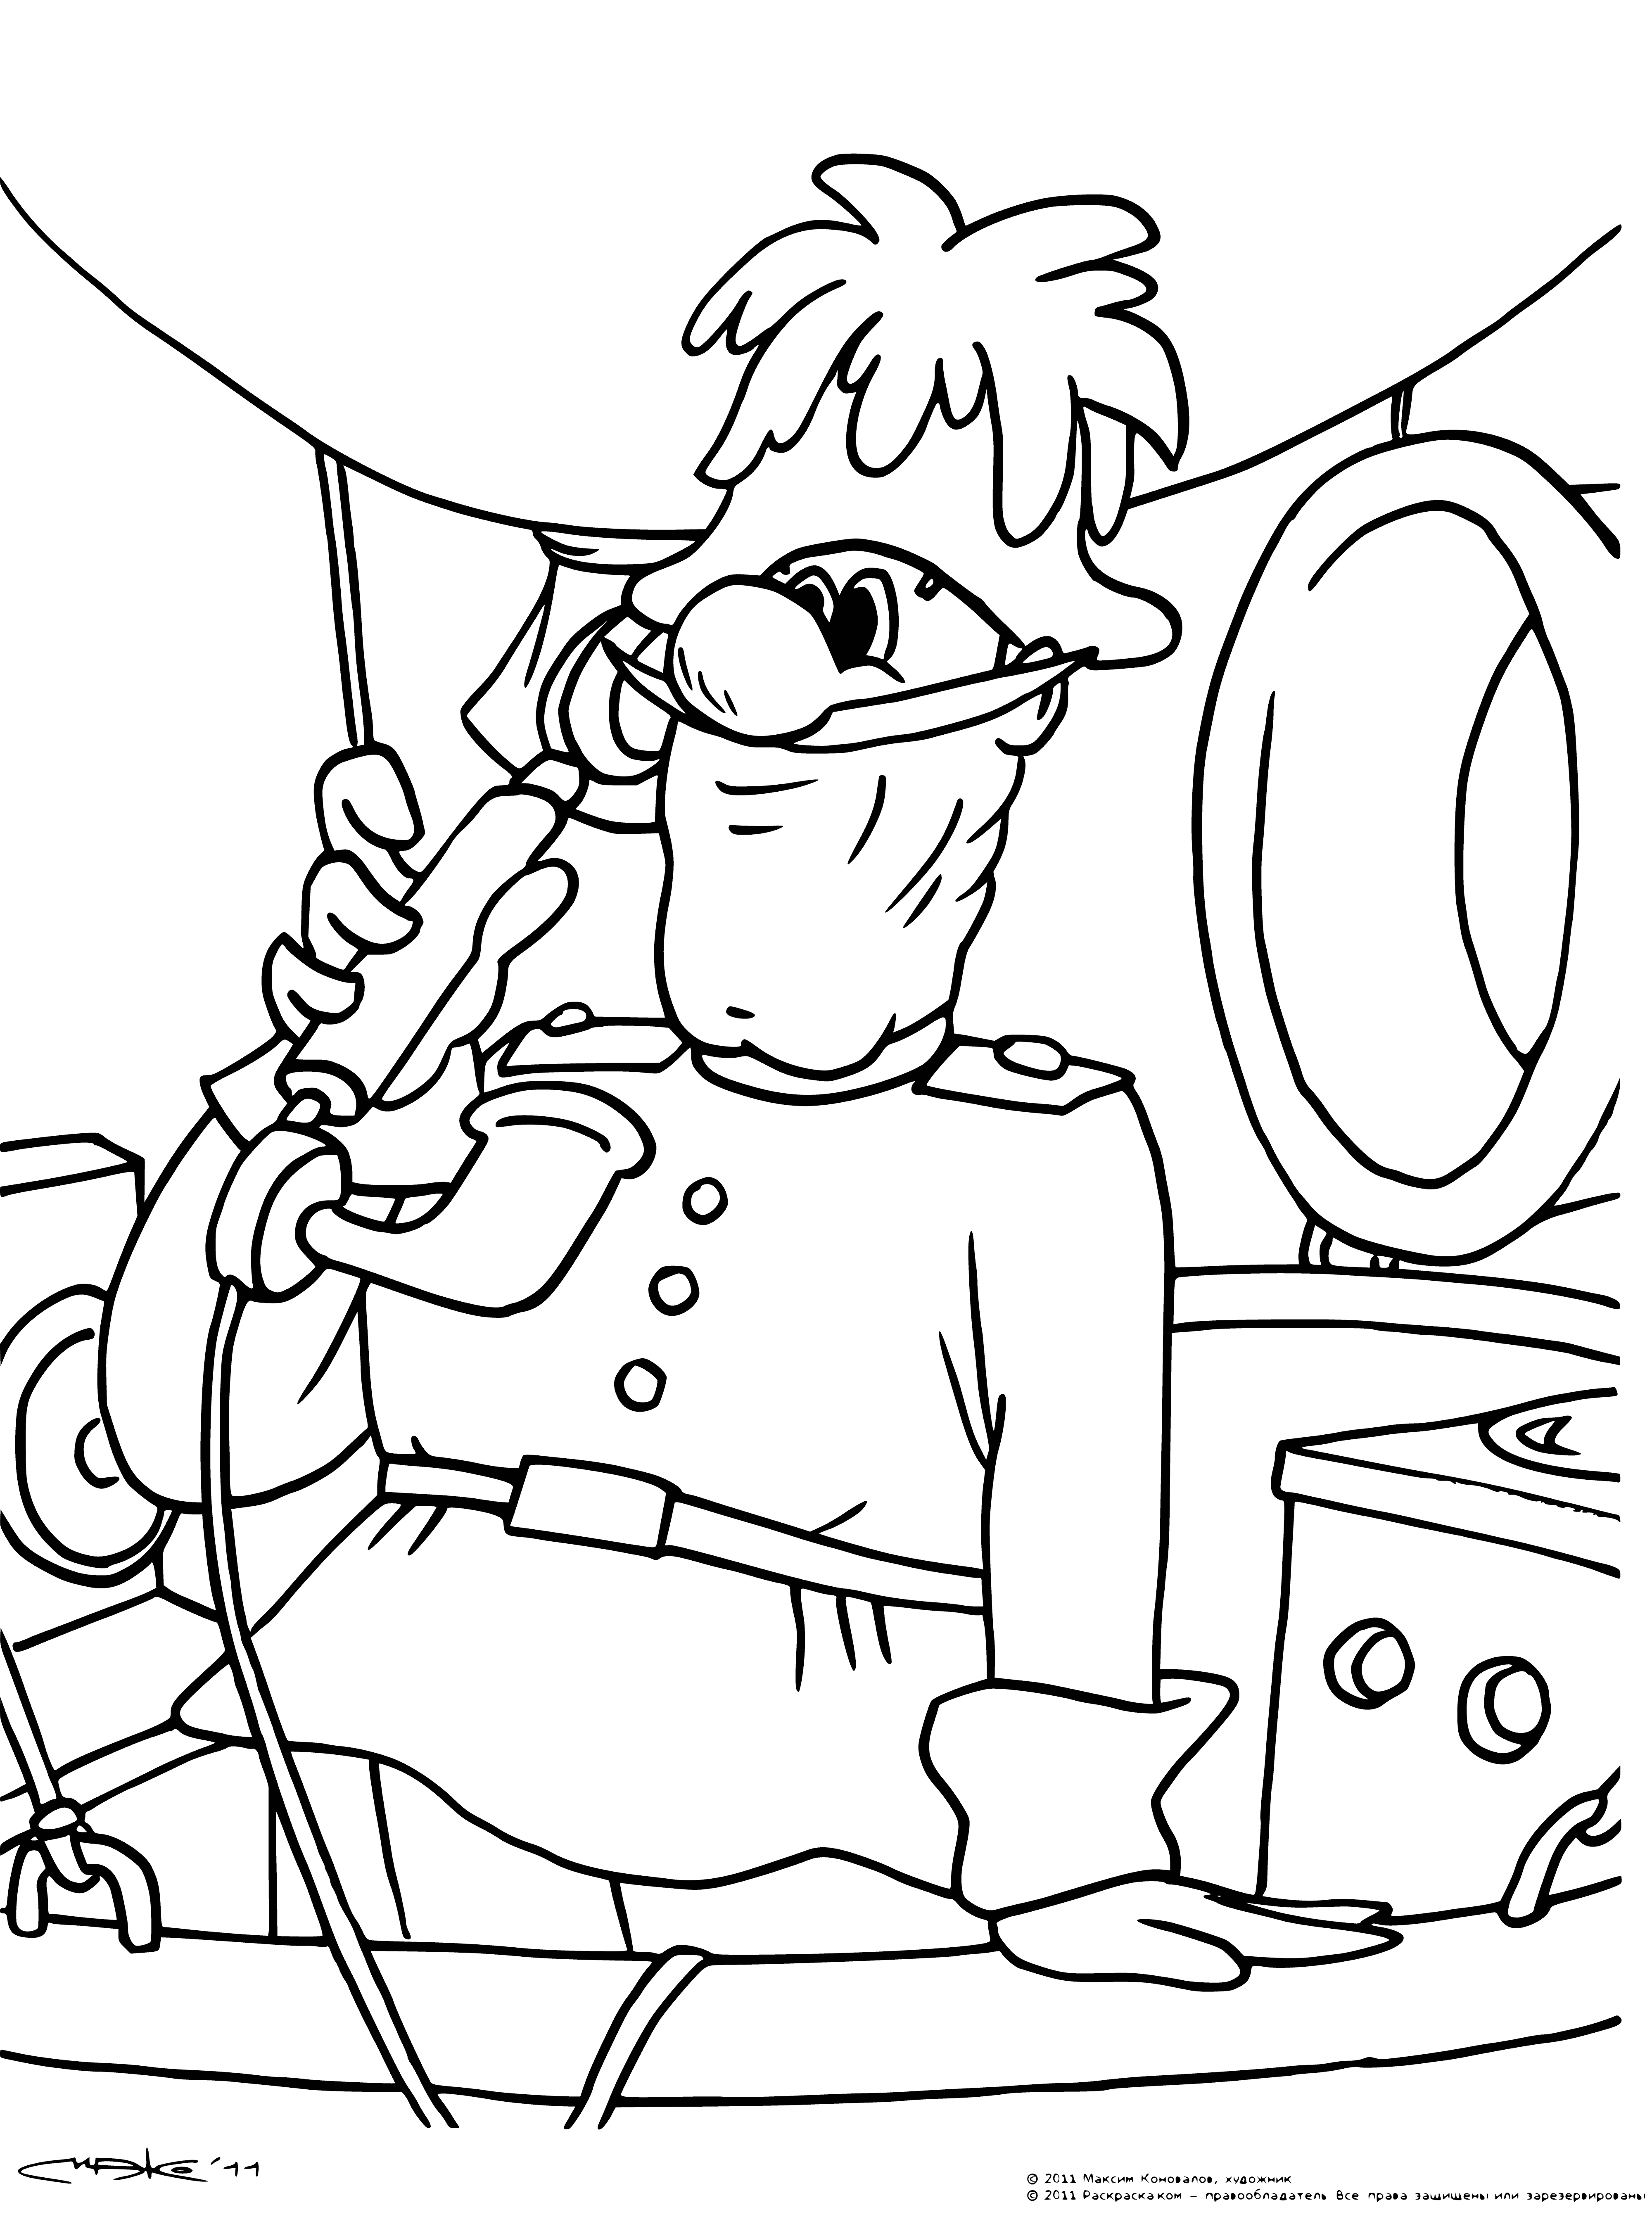 coloring page: Police chief Funtik is a pig on a mission - protecting the town from crime and being a hero to the community. #savingtheday